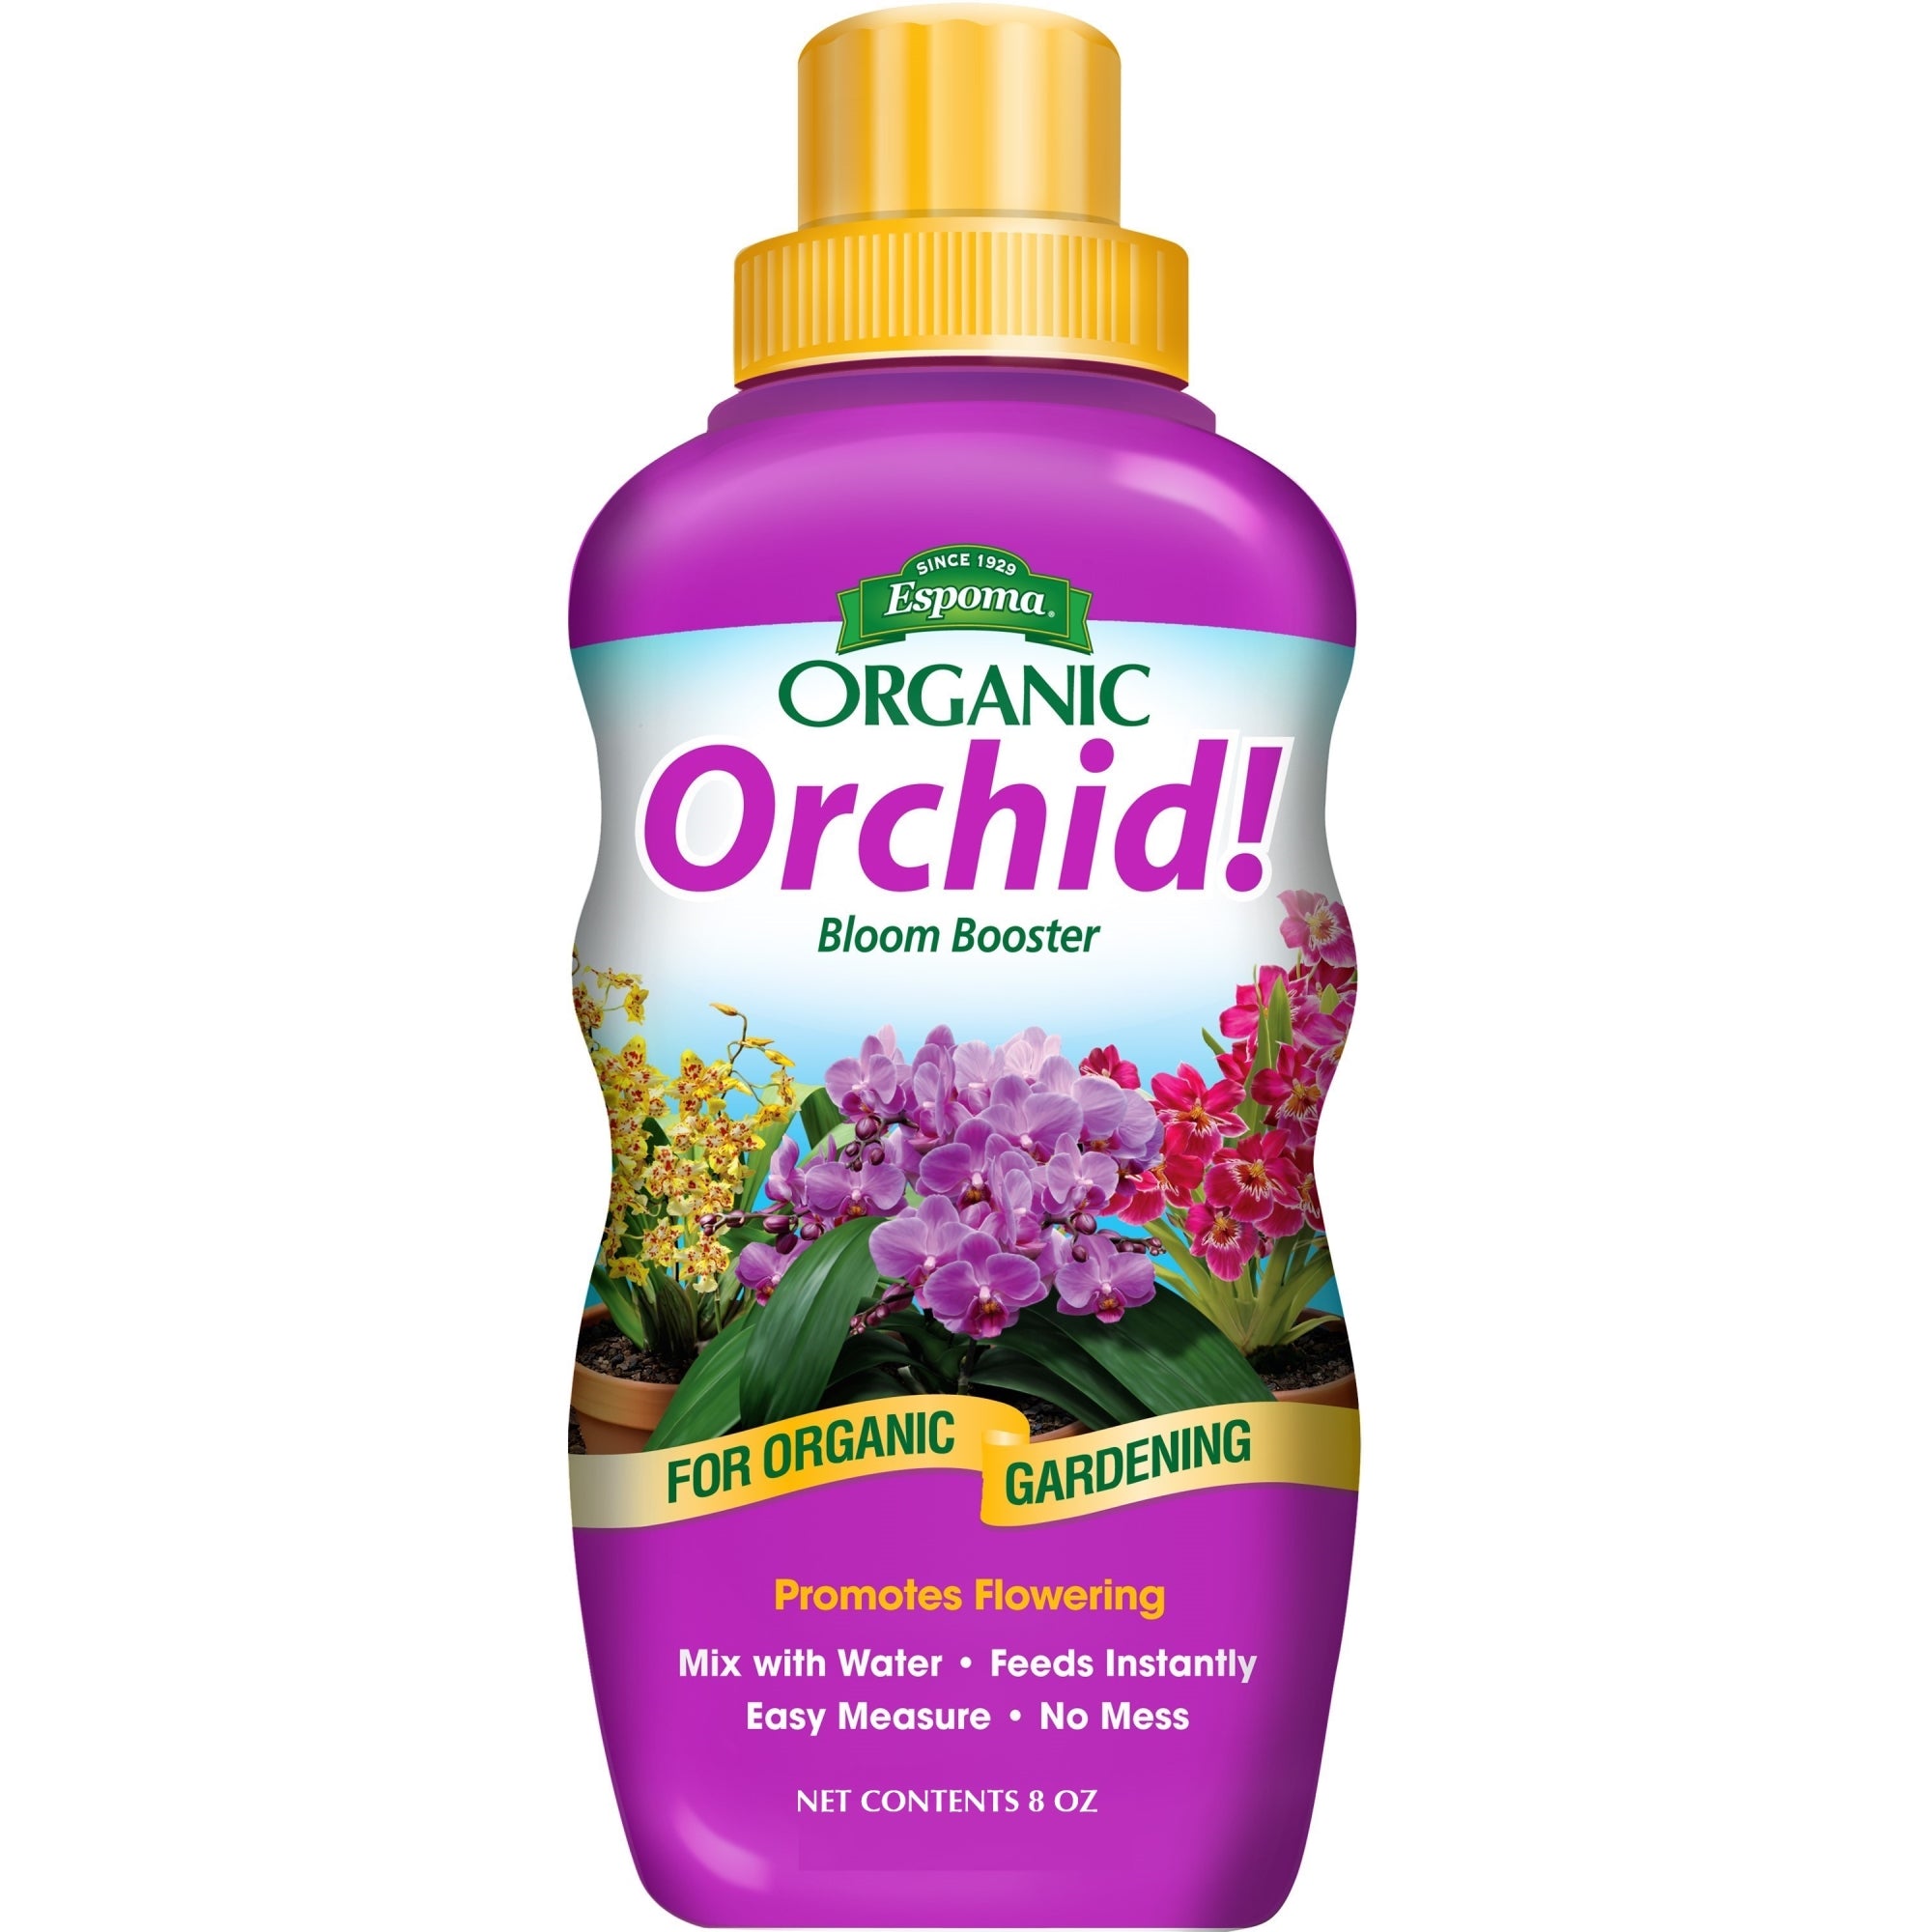 Espoma Organic Orchid! Plant Food and Bloom Booster for all Orchids and Bromeliads, Ideal for Phalaenopsis, Dendrobium, and Other Types of Orchids, Concentrate, 8 oz